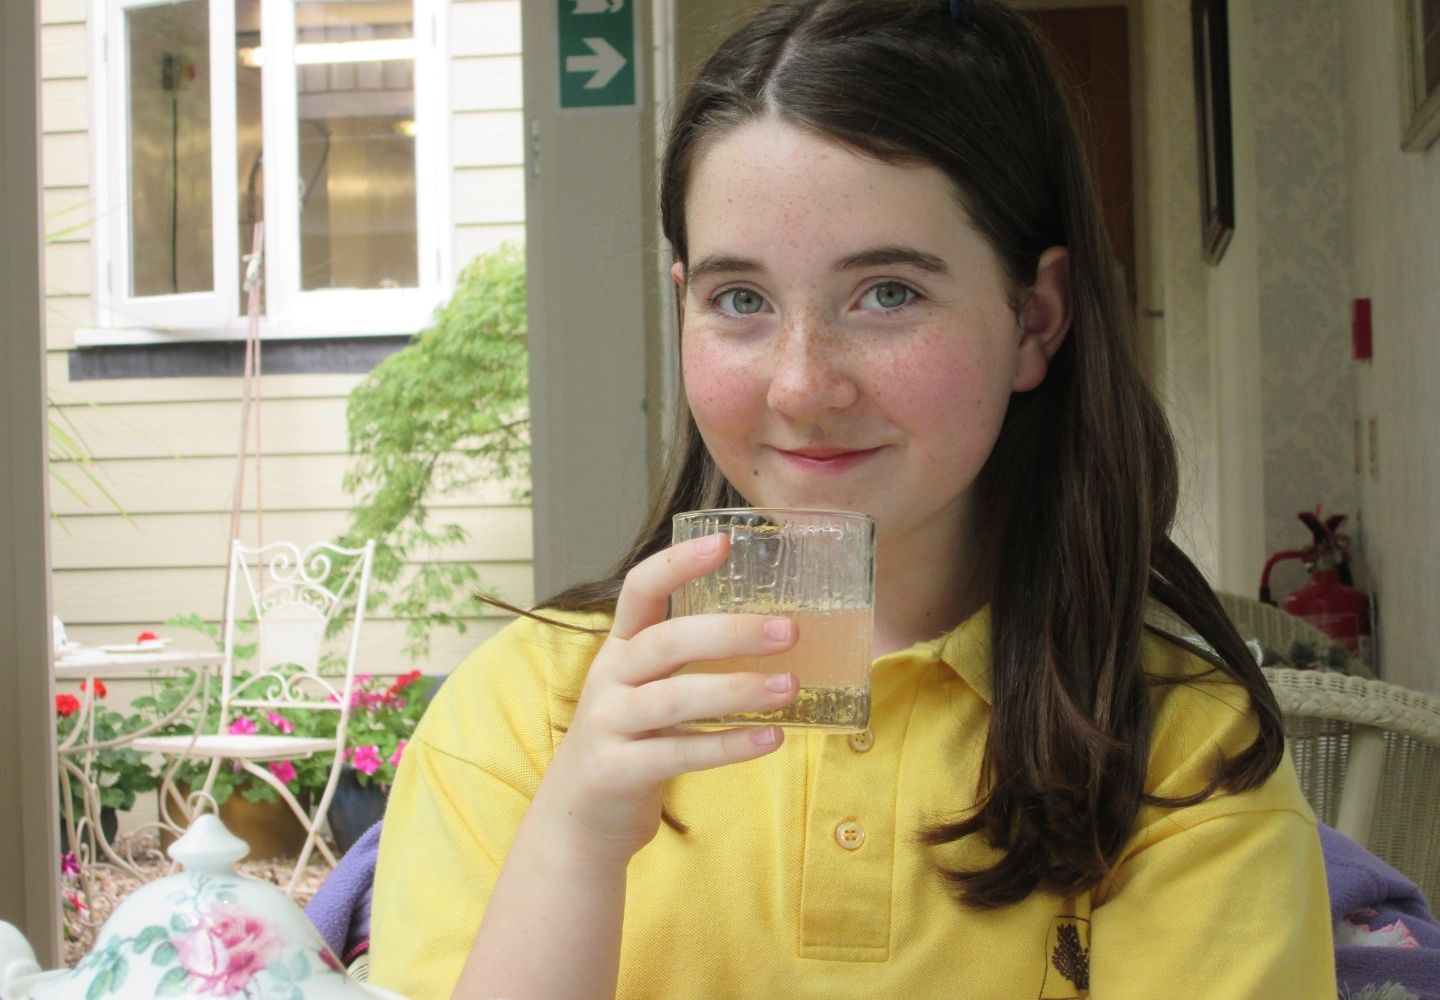 Kira holding a drink and wearing a yellow top